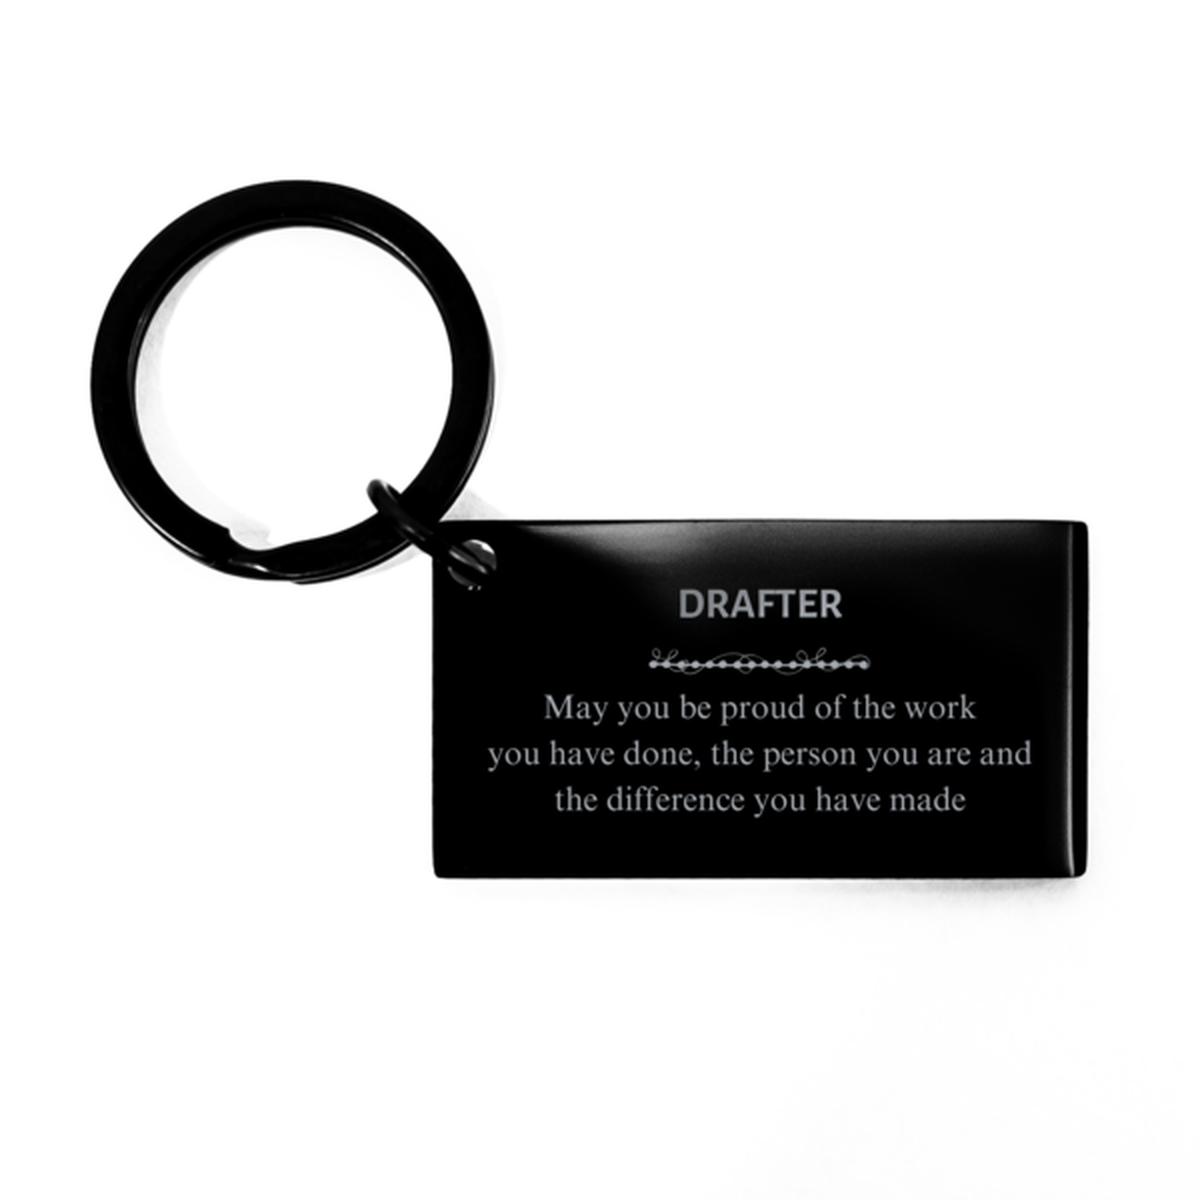 Historian May you be proud of the work you have done, Retirement Drafter Keychain for Colleague Appreciation Gifts Amazing for Drafter